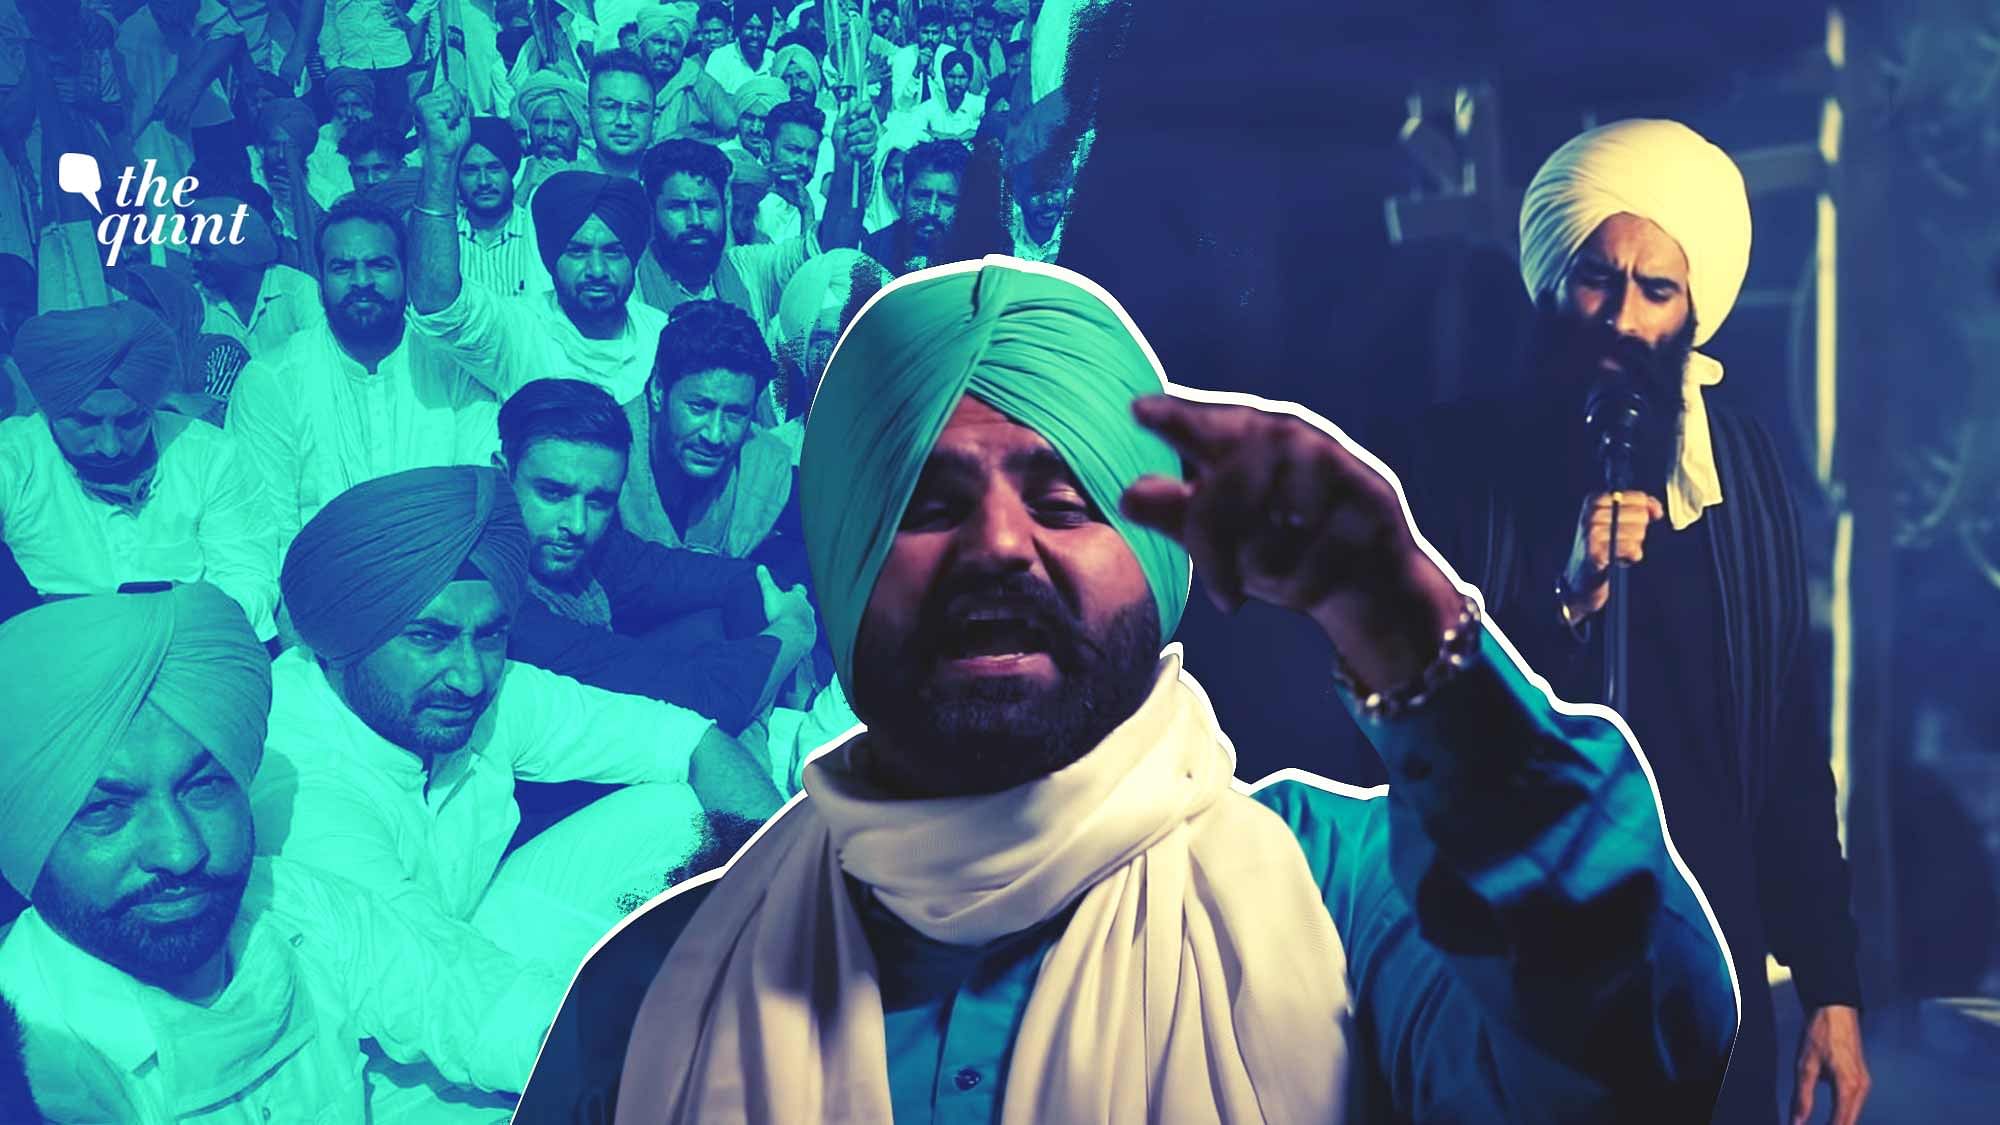 Punjabi singers have joined the farmers’ protest against the Narendra Modi government’s new farm laws.